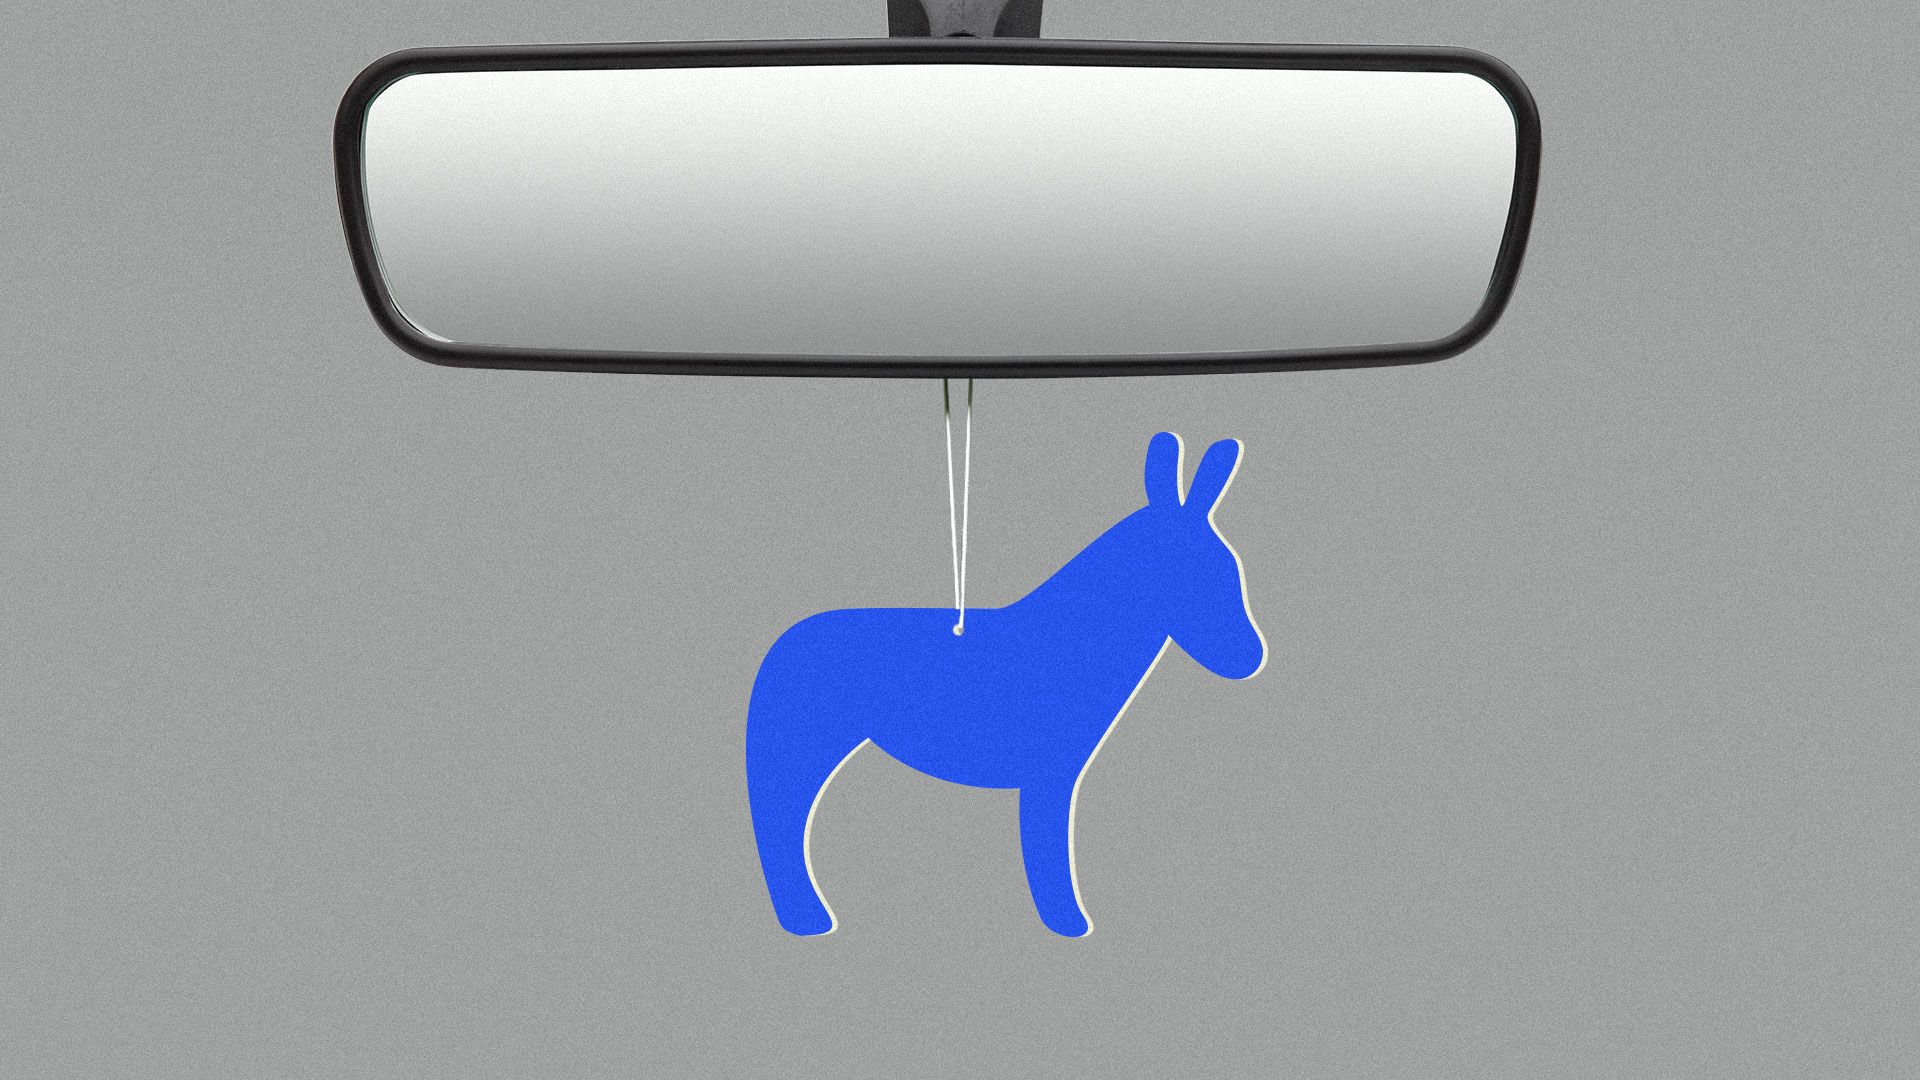 Illustration of a car freshener in the shape of a donkey.